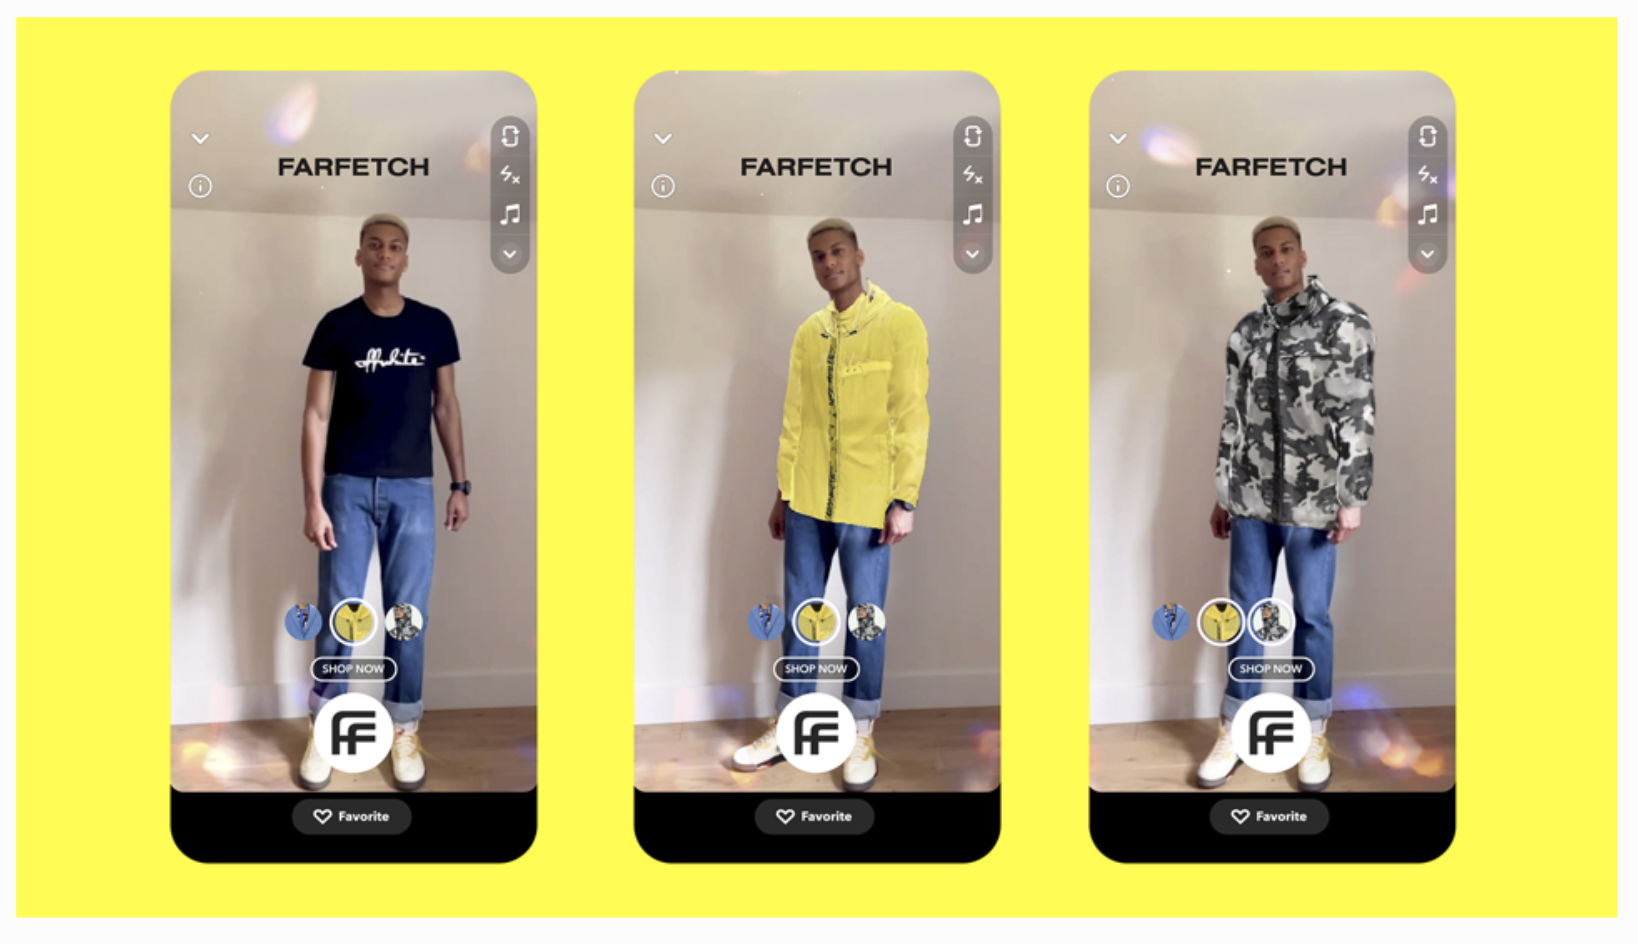 Snapchat-s latest augmented reality (AR) enhancements enable immersive, real-time try-on experiences with top fashion brands, revolutionizing virtual fitting rooms